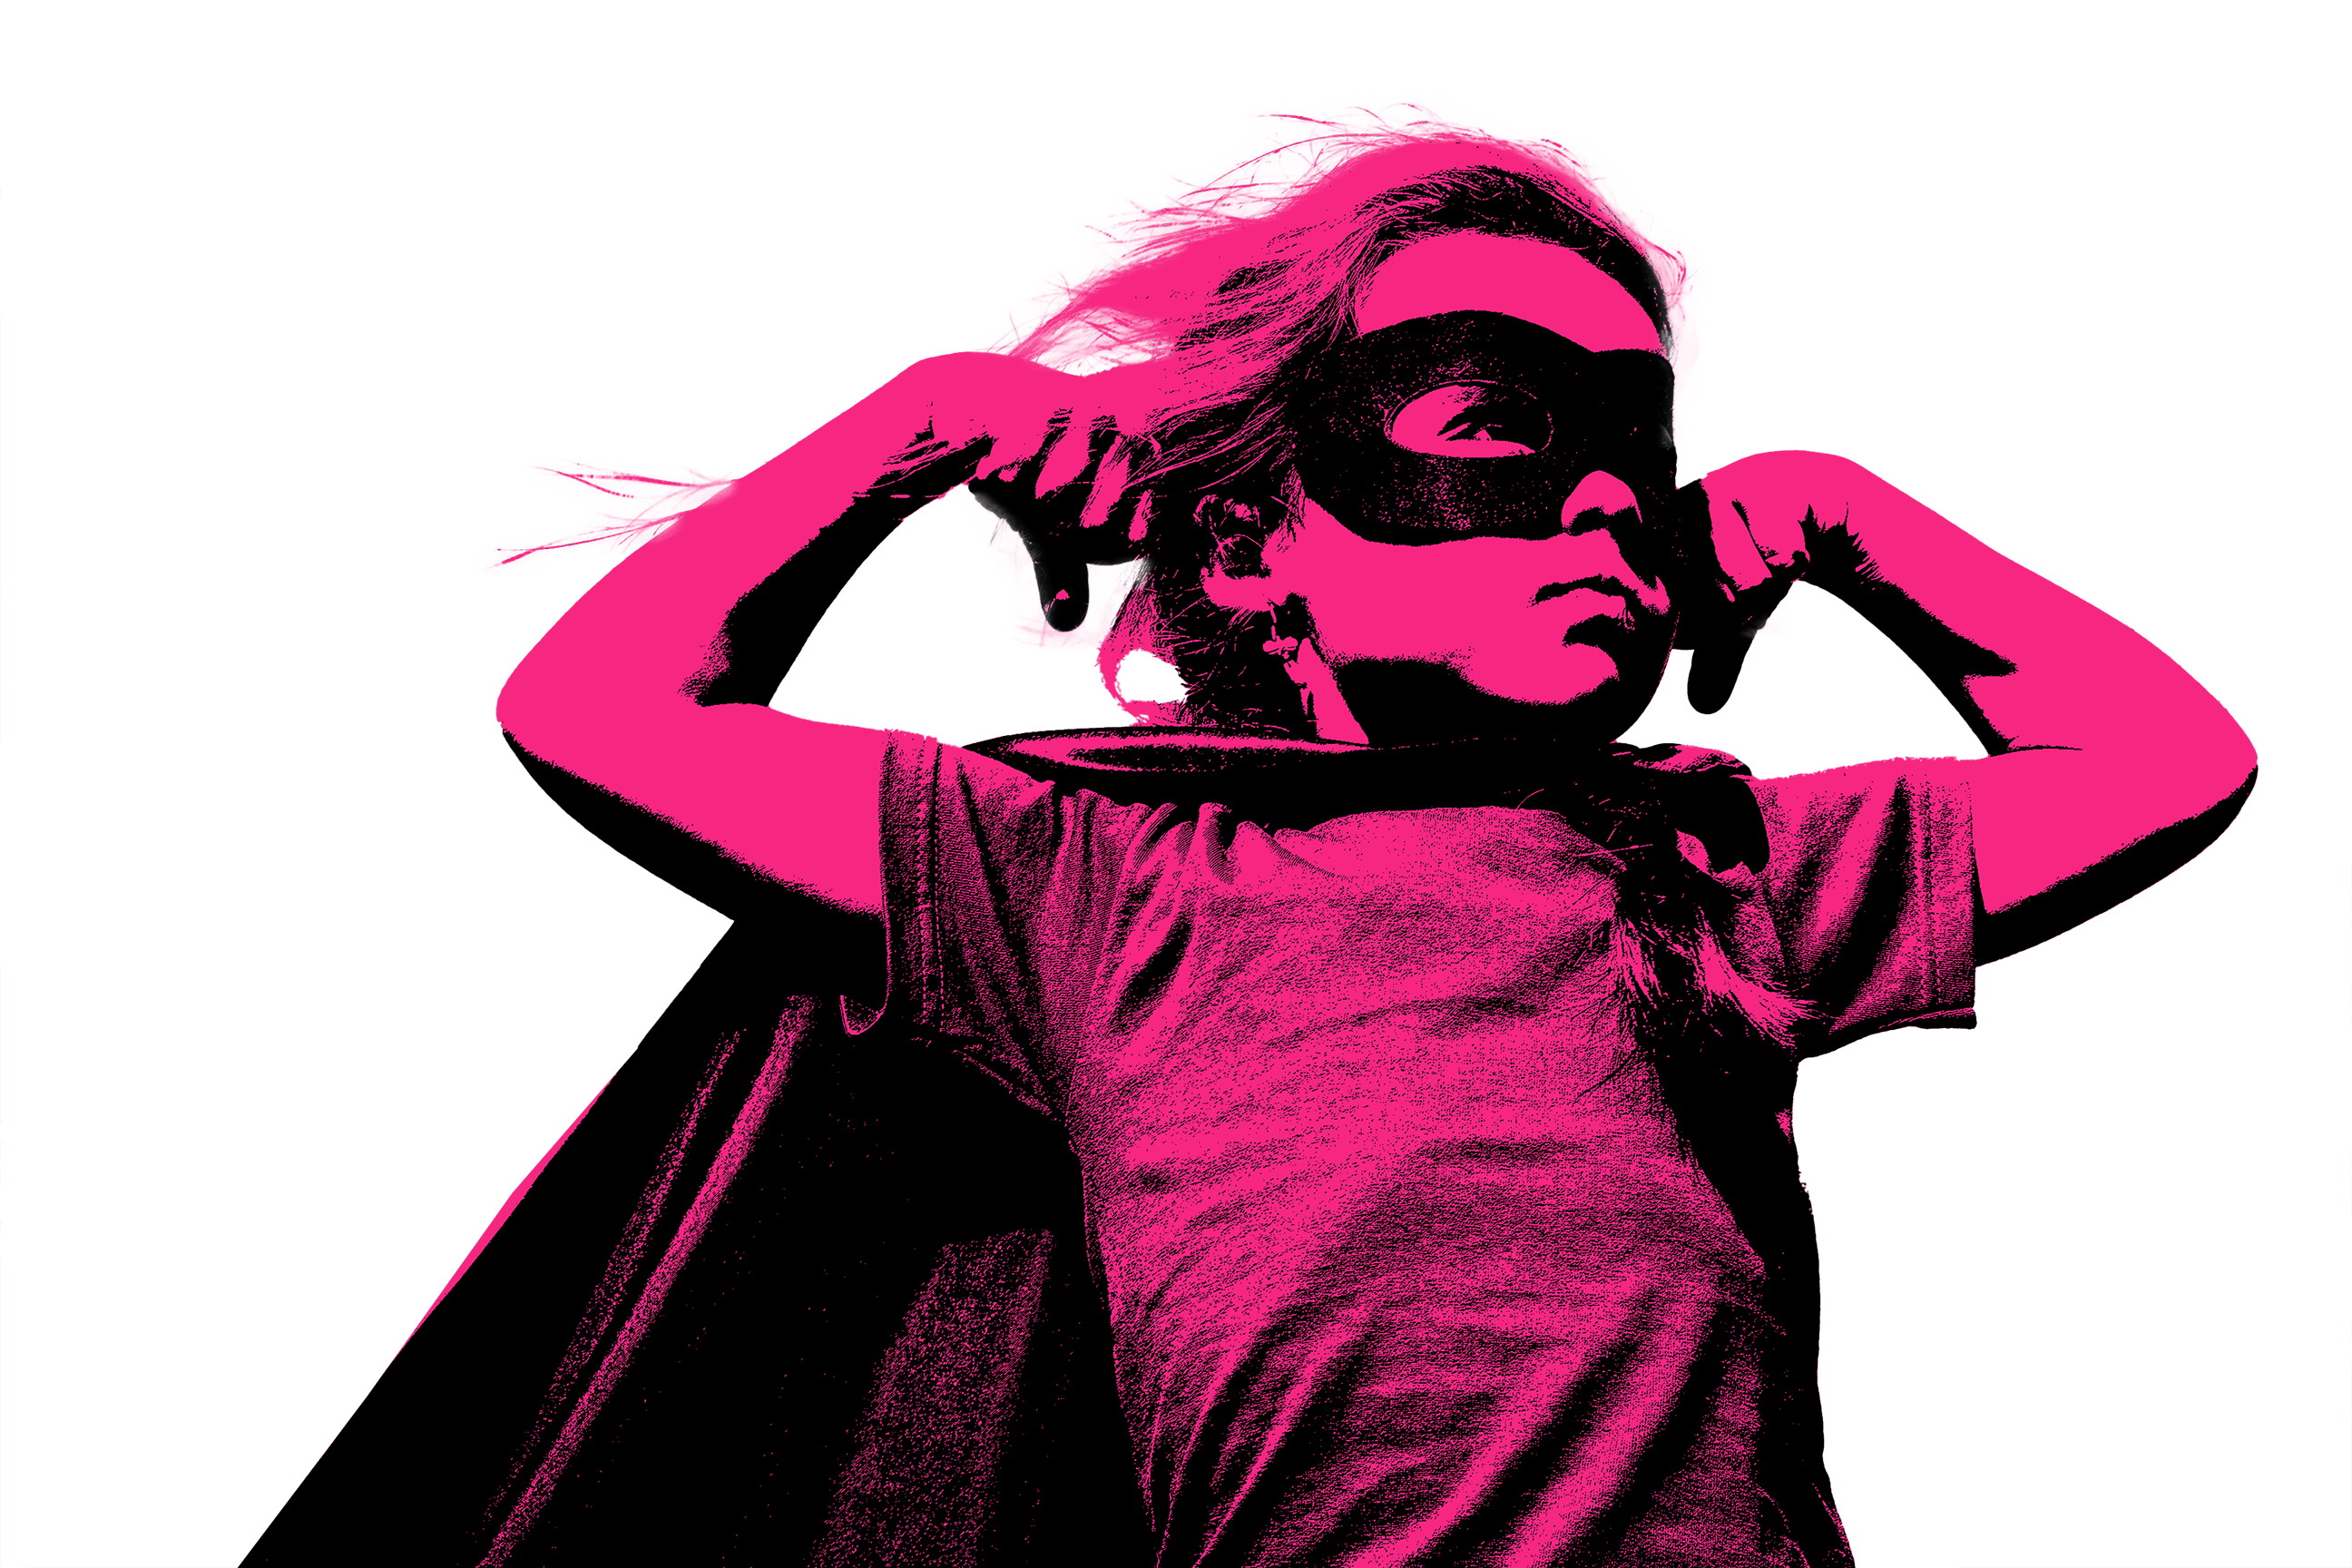 Technical PR, engineering PR and technology PR being championed by a pink superhero. Probably.